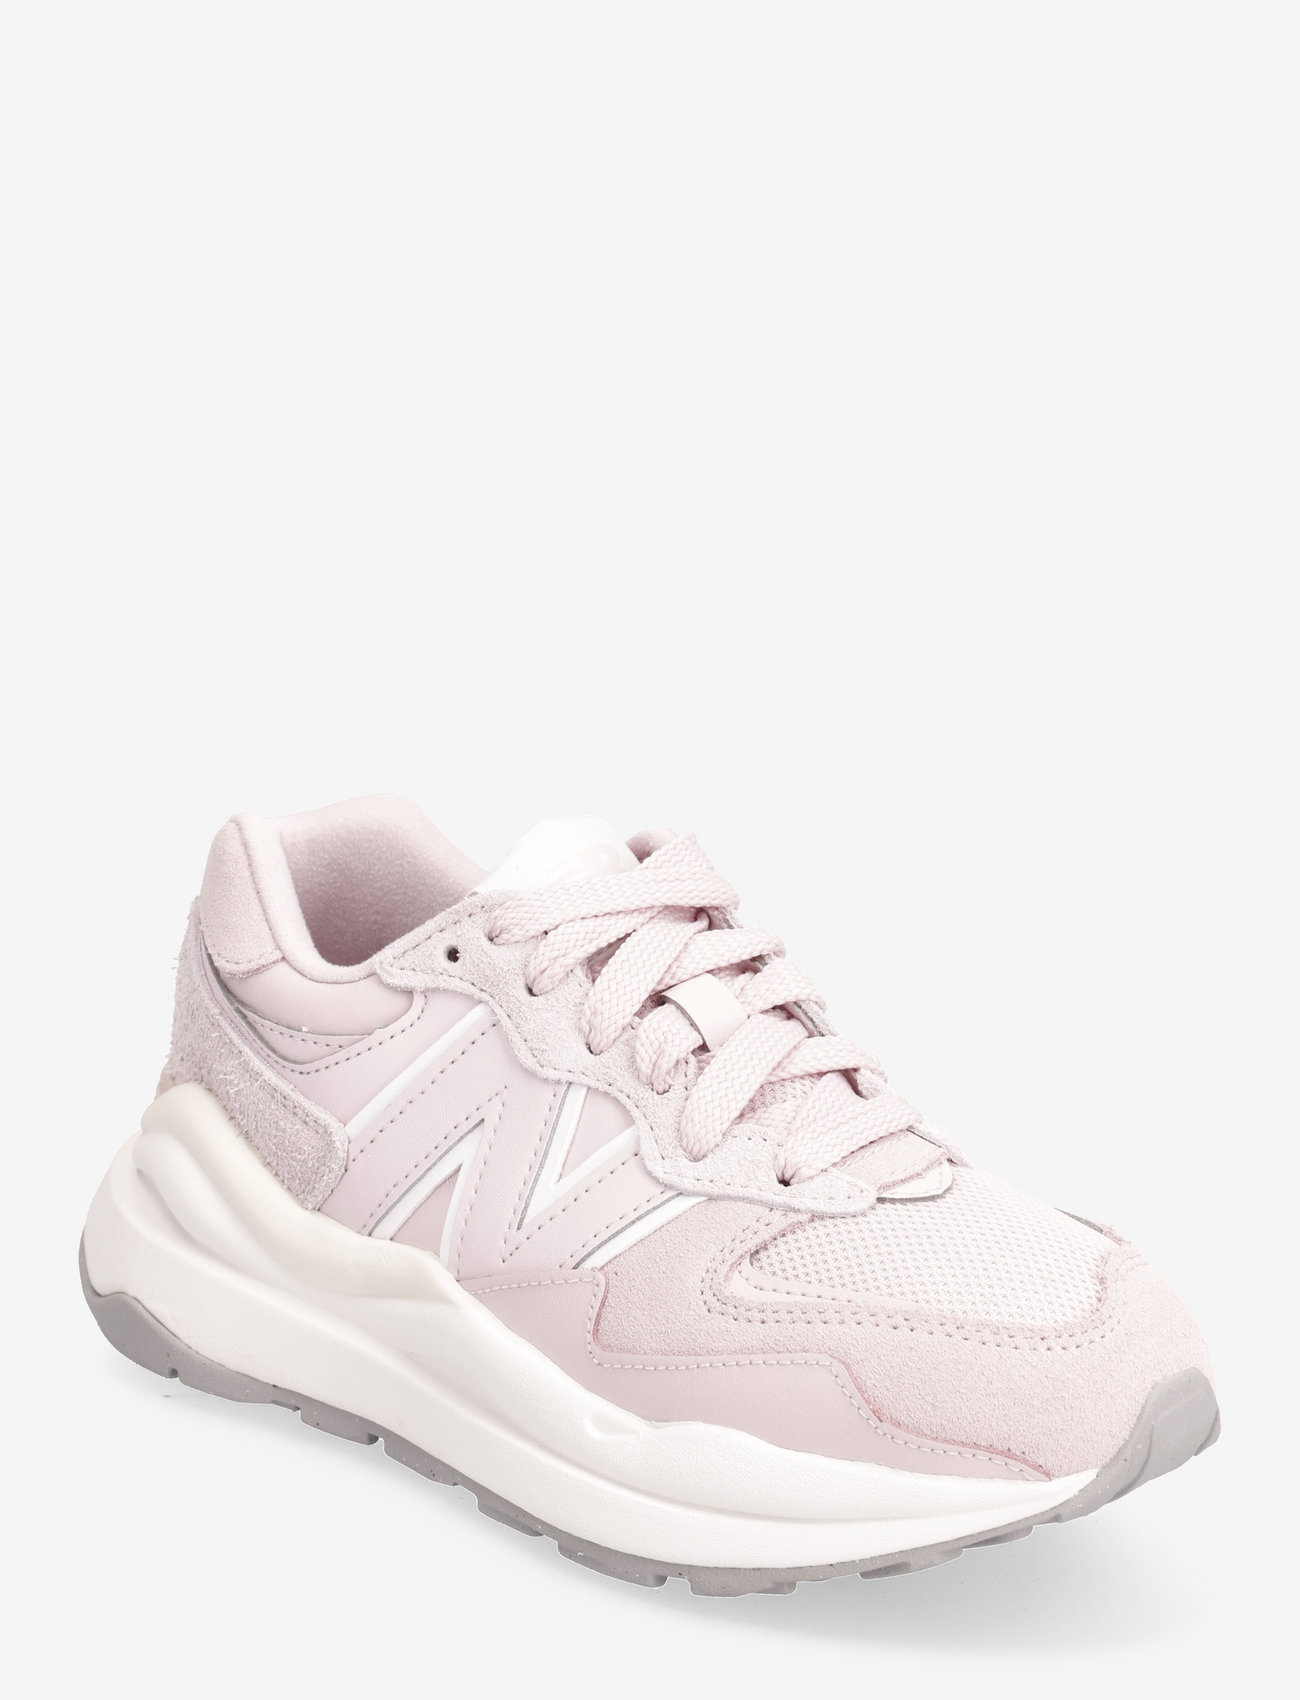 New Balance - New Balance 57/40 - low top sneakers - stone pink - 0